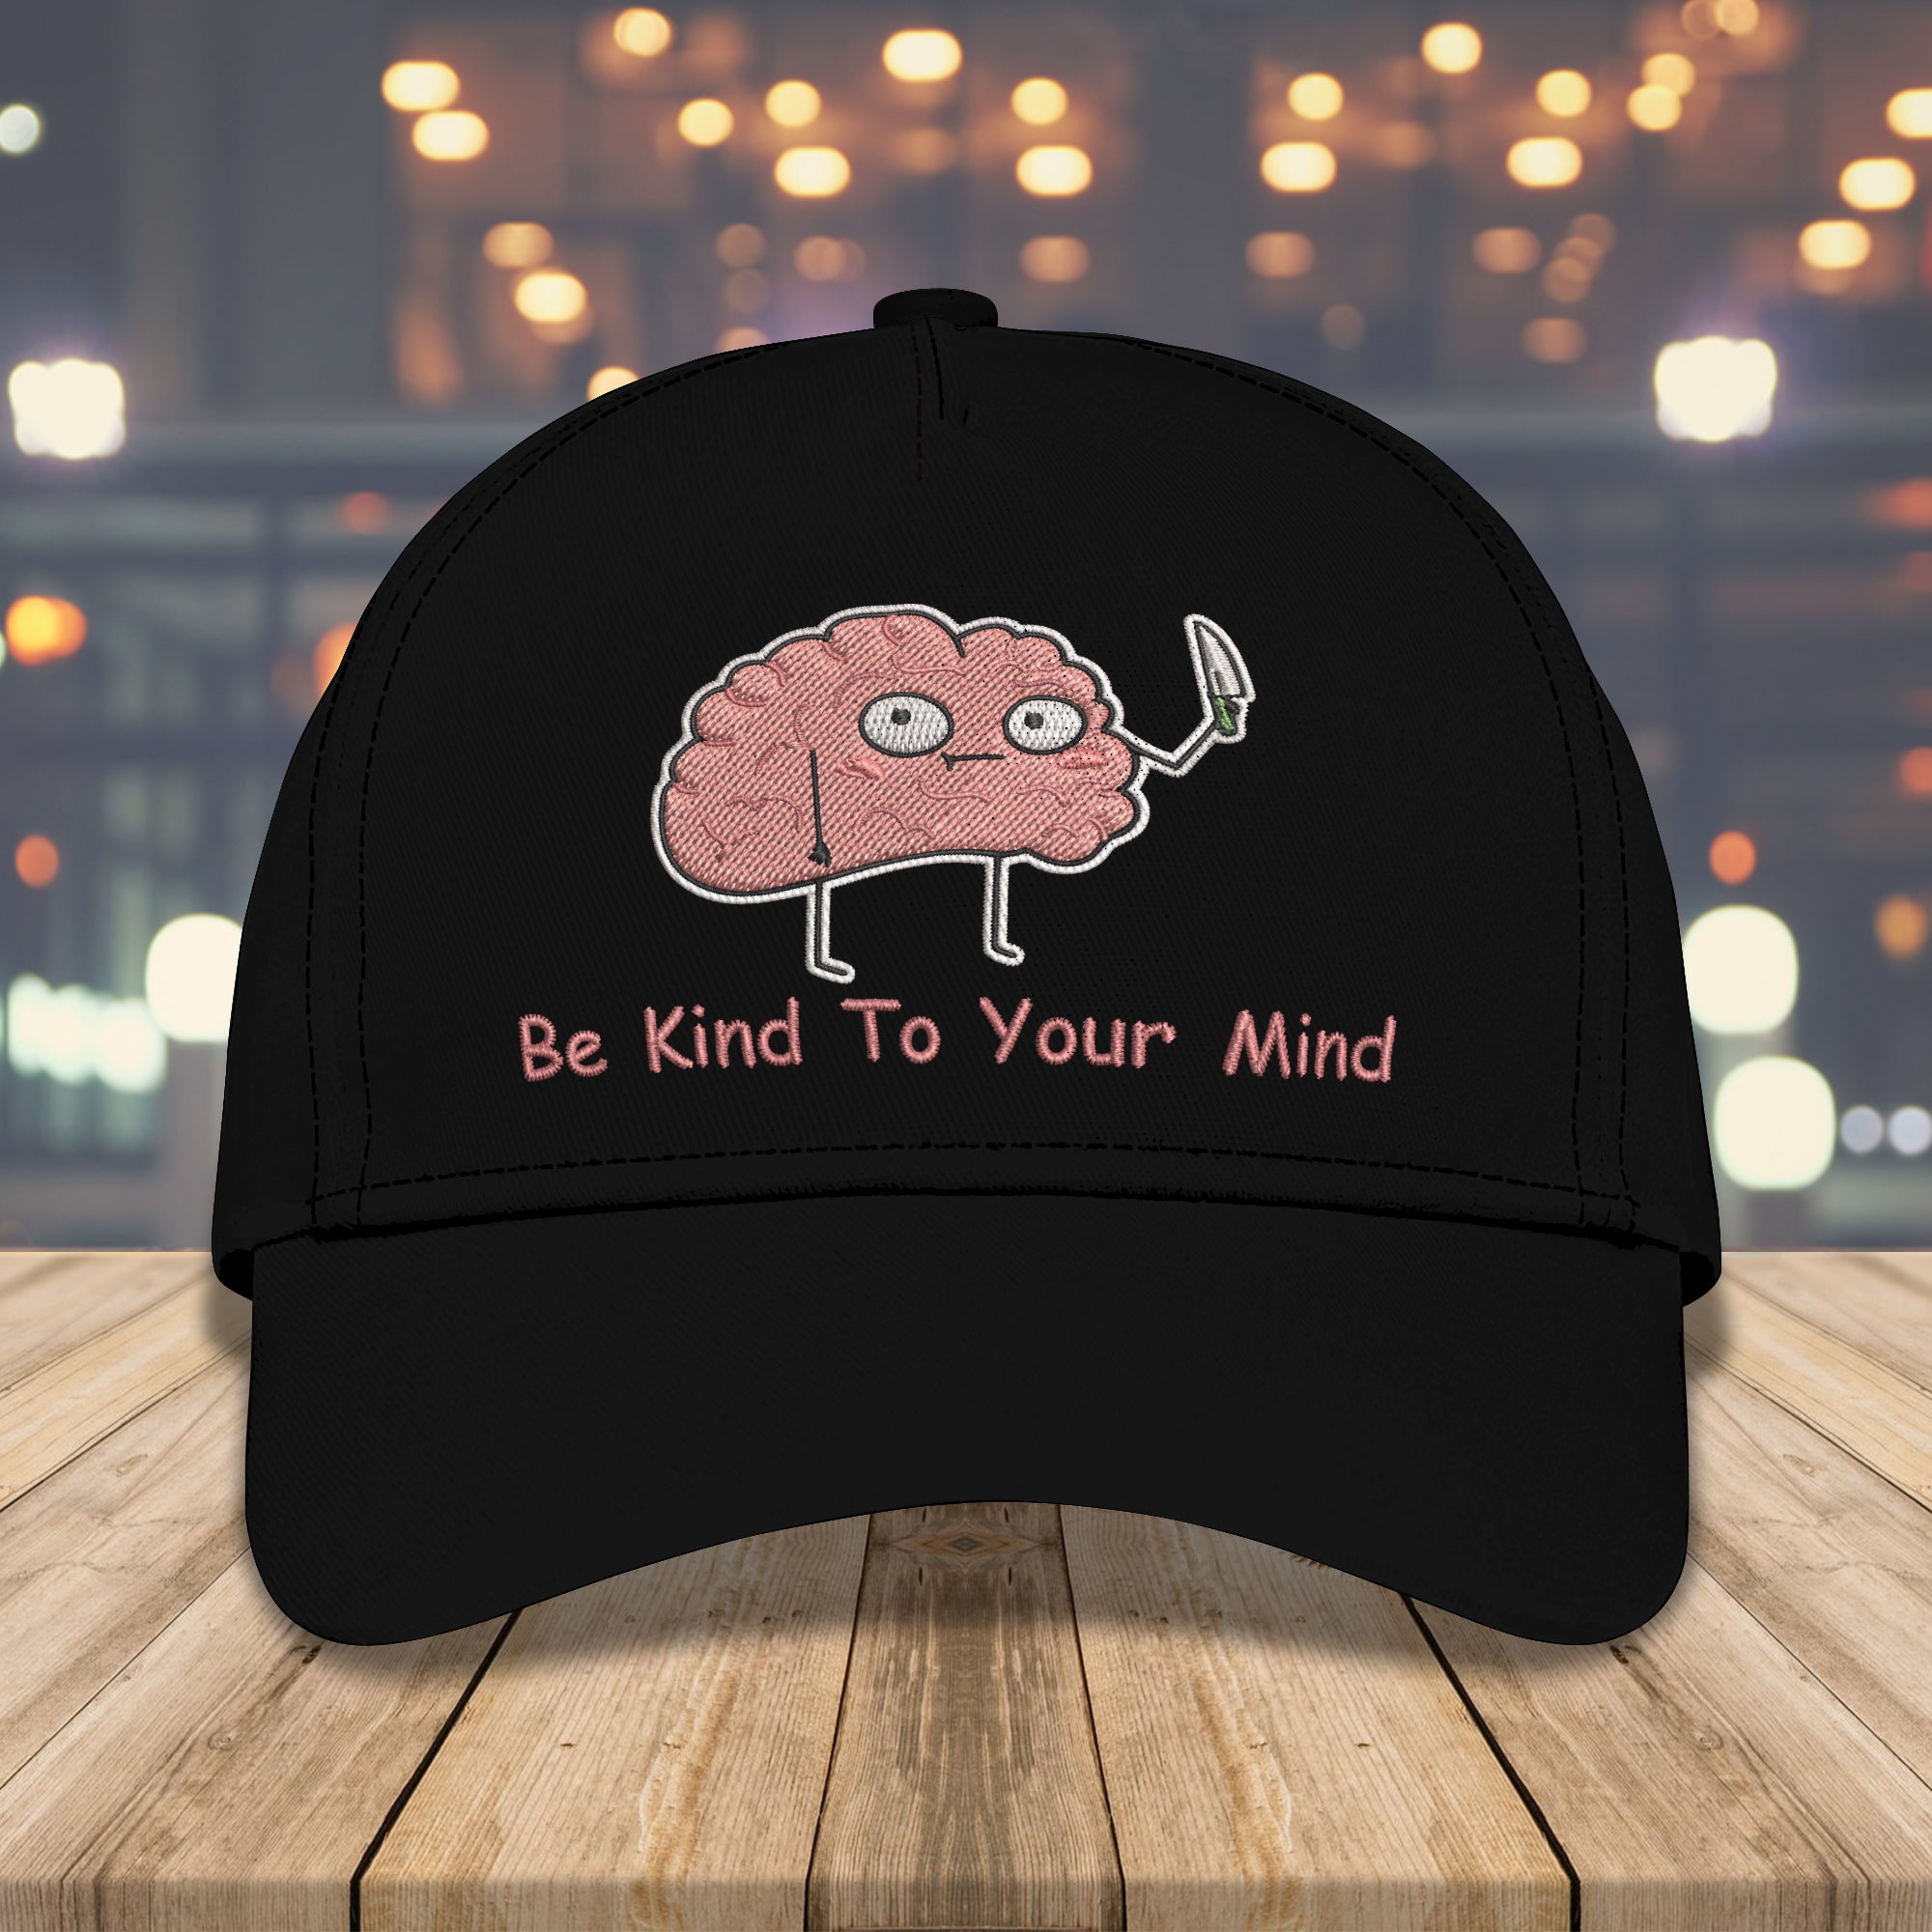 Be Kind To Your Mind Embroidered Baseball Caps